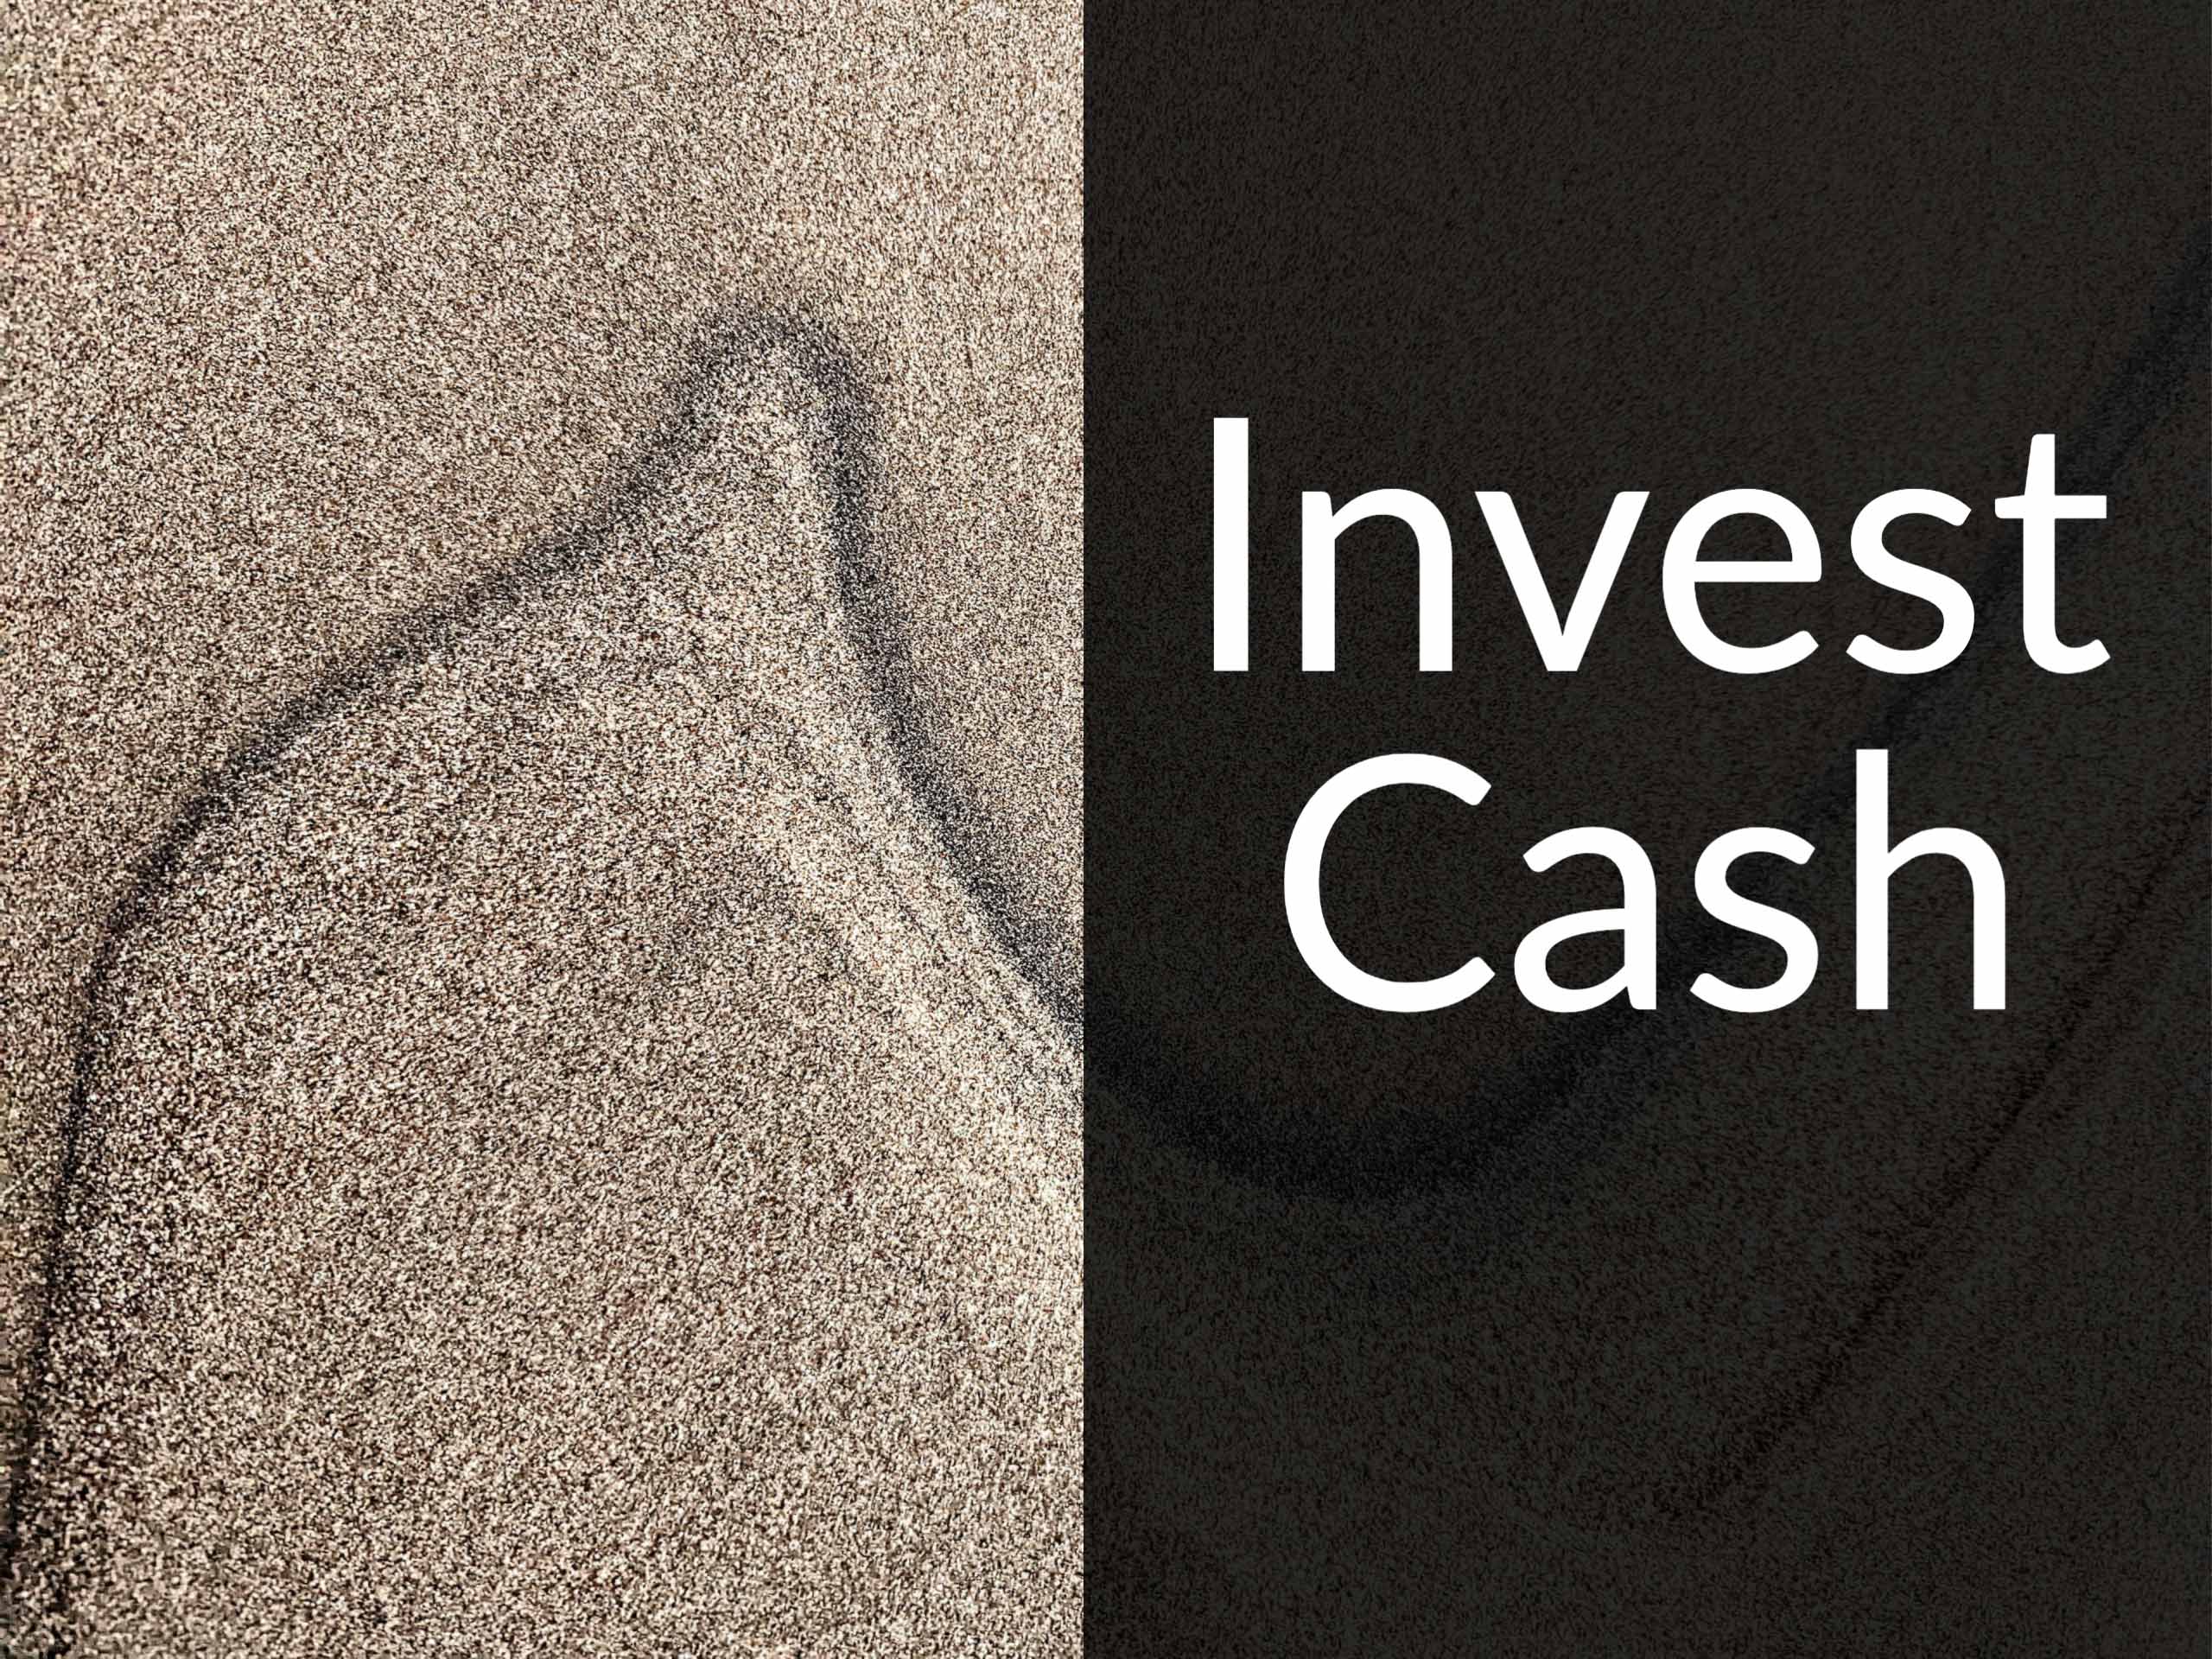 412: Where to Invest Your Cash Savings for Higher Yields